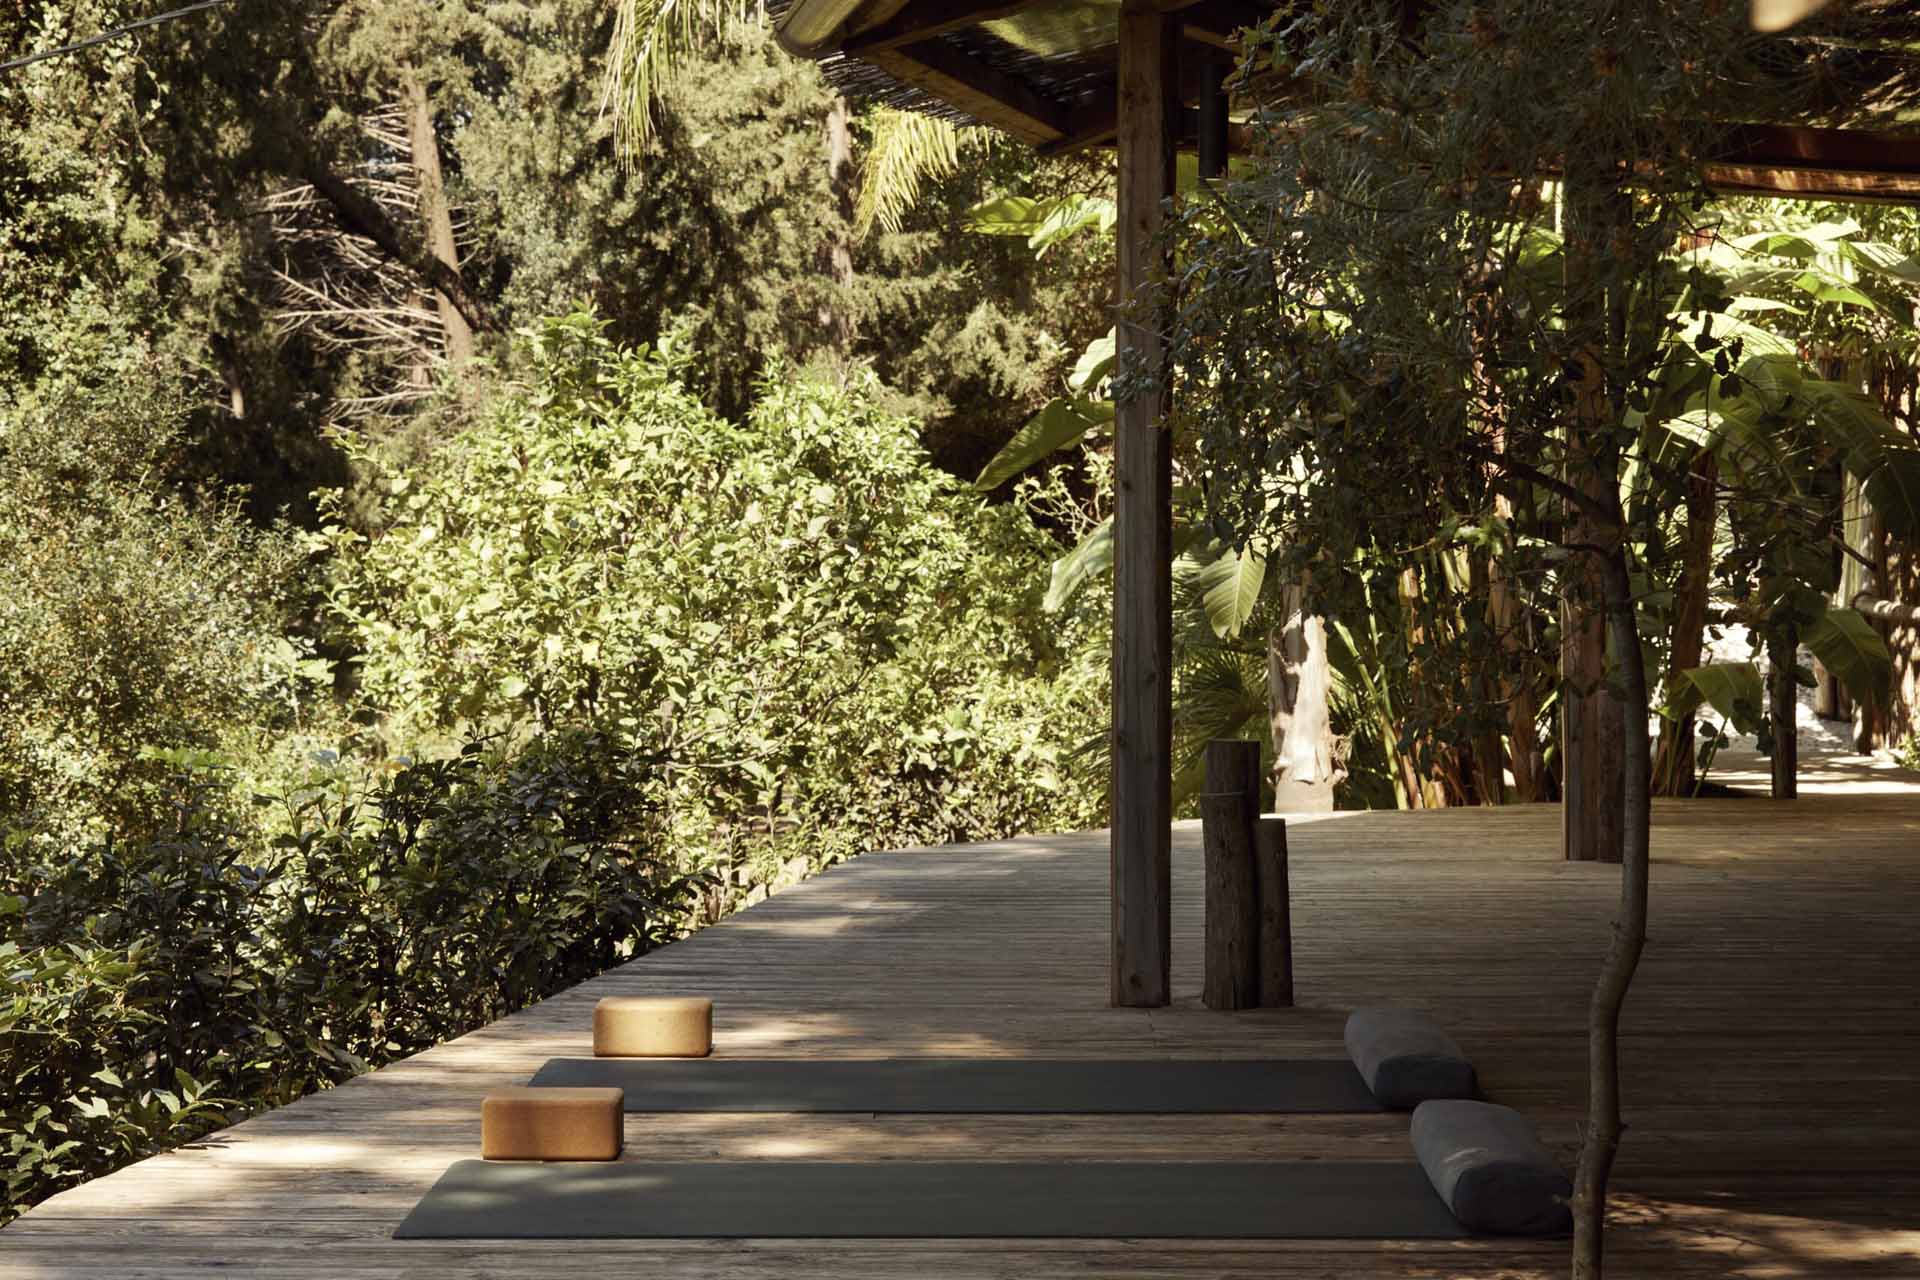 yoga mattresses in a wooden patio